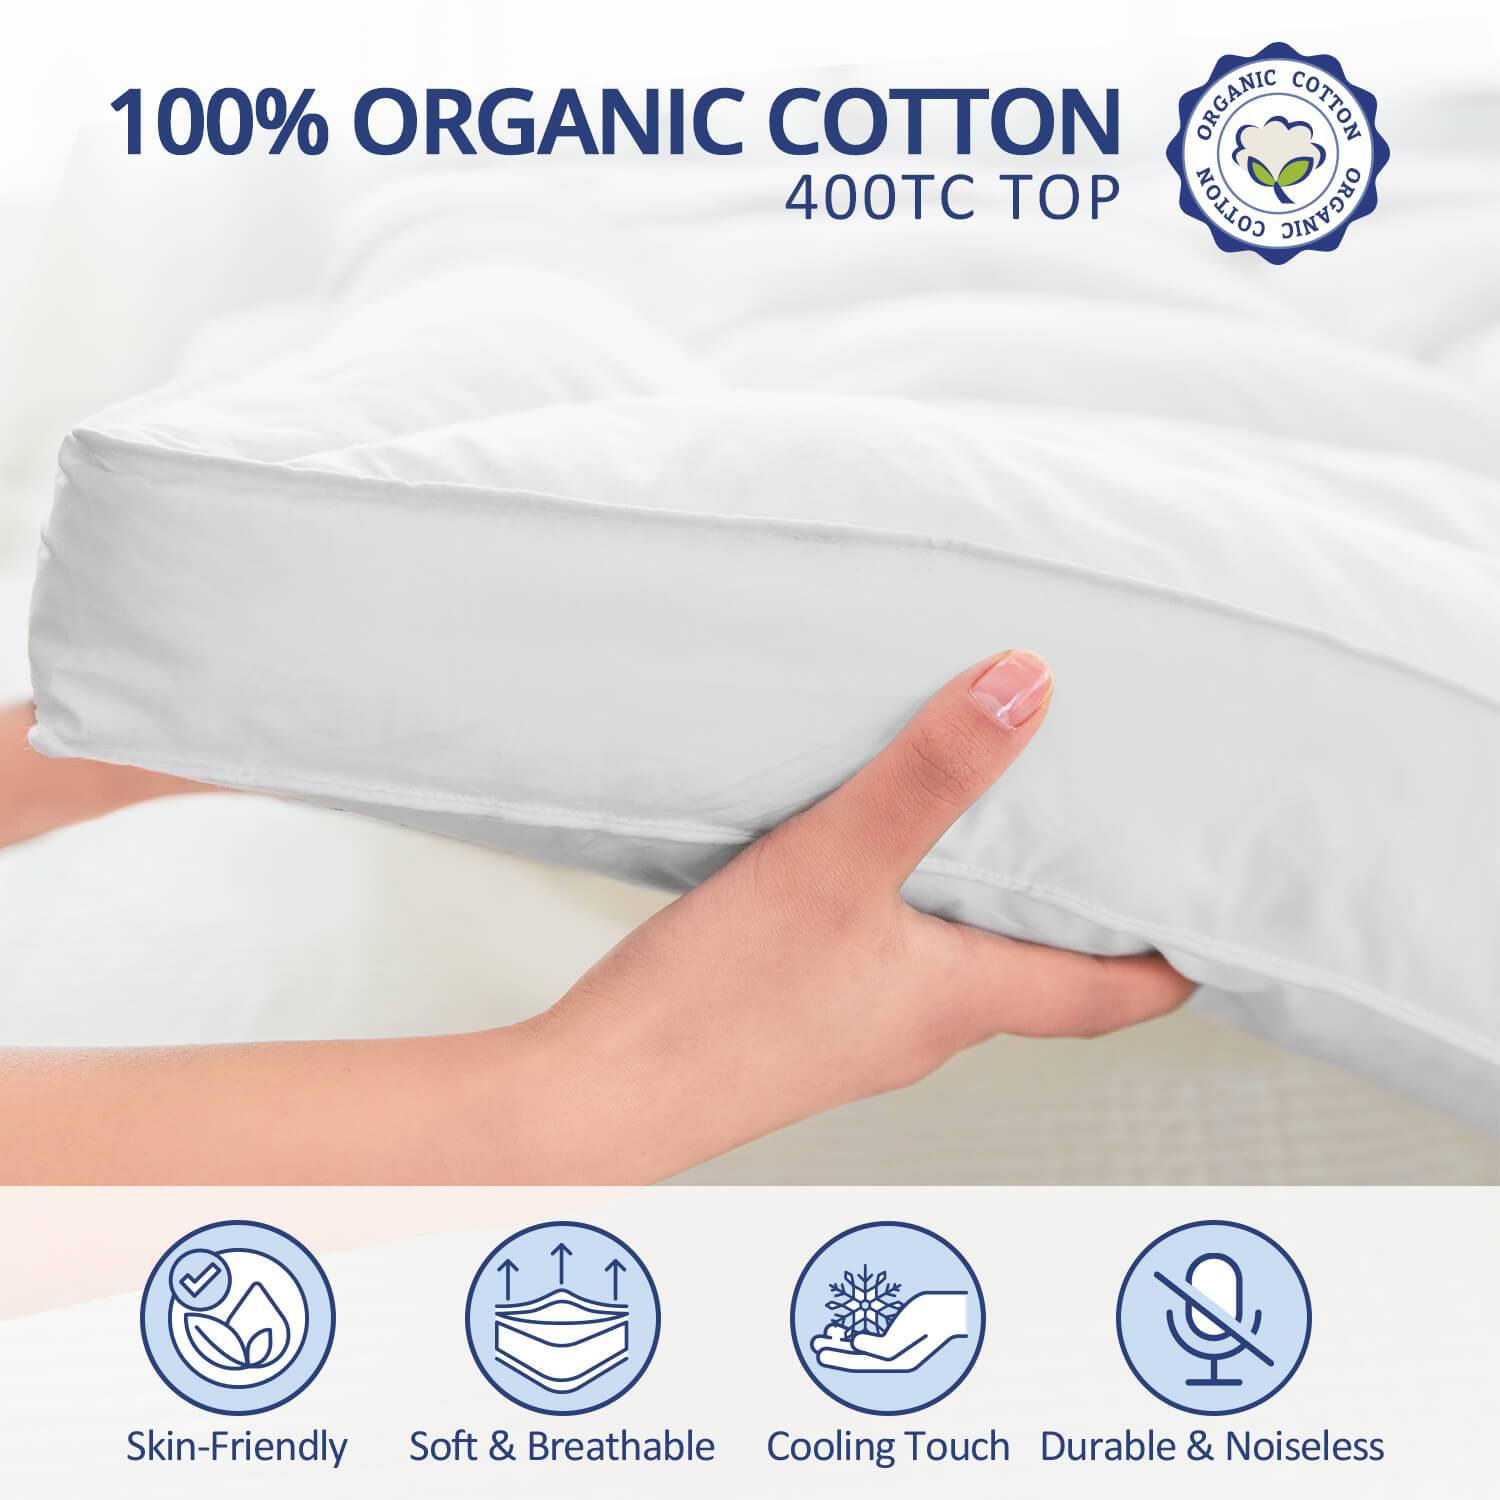  Extra Thick Mattress Topper Full bed Size 3 Inch Highly  Breathable Cooling Mattress Pad Cover.100% Cotton Pillow Top Quilted  Mattress Protect Bed Mattress Topper.Soft Down Alternative Fill (54*75'') :  Home 